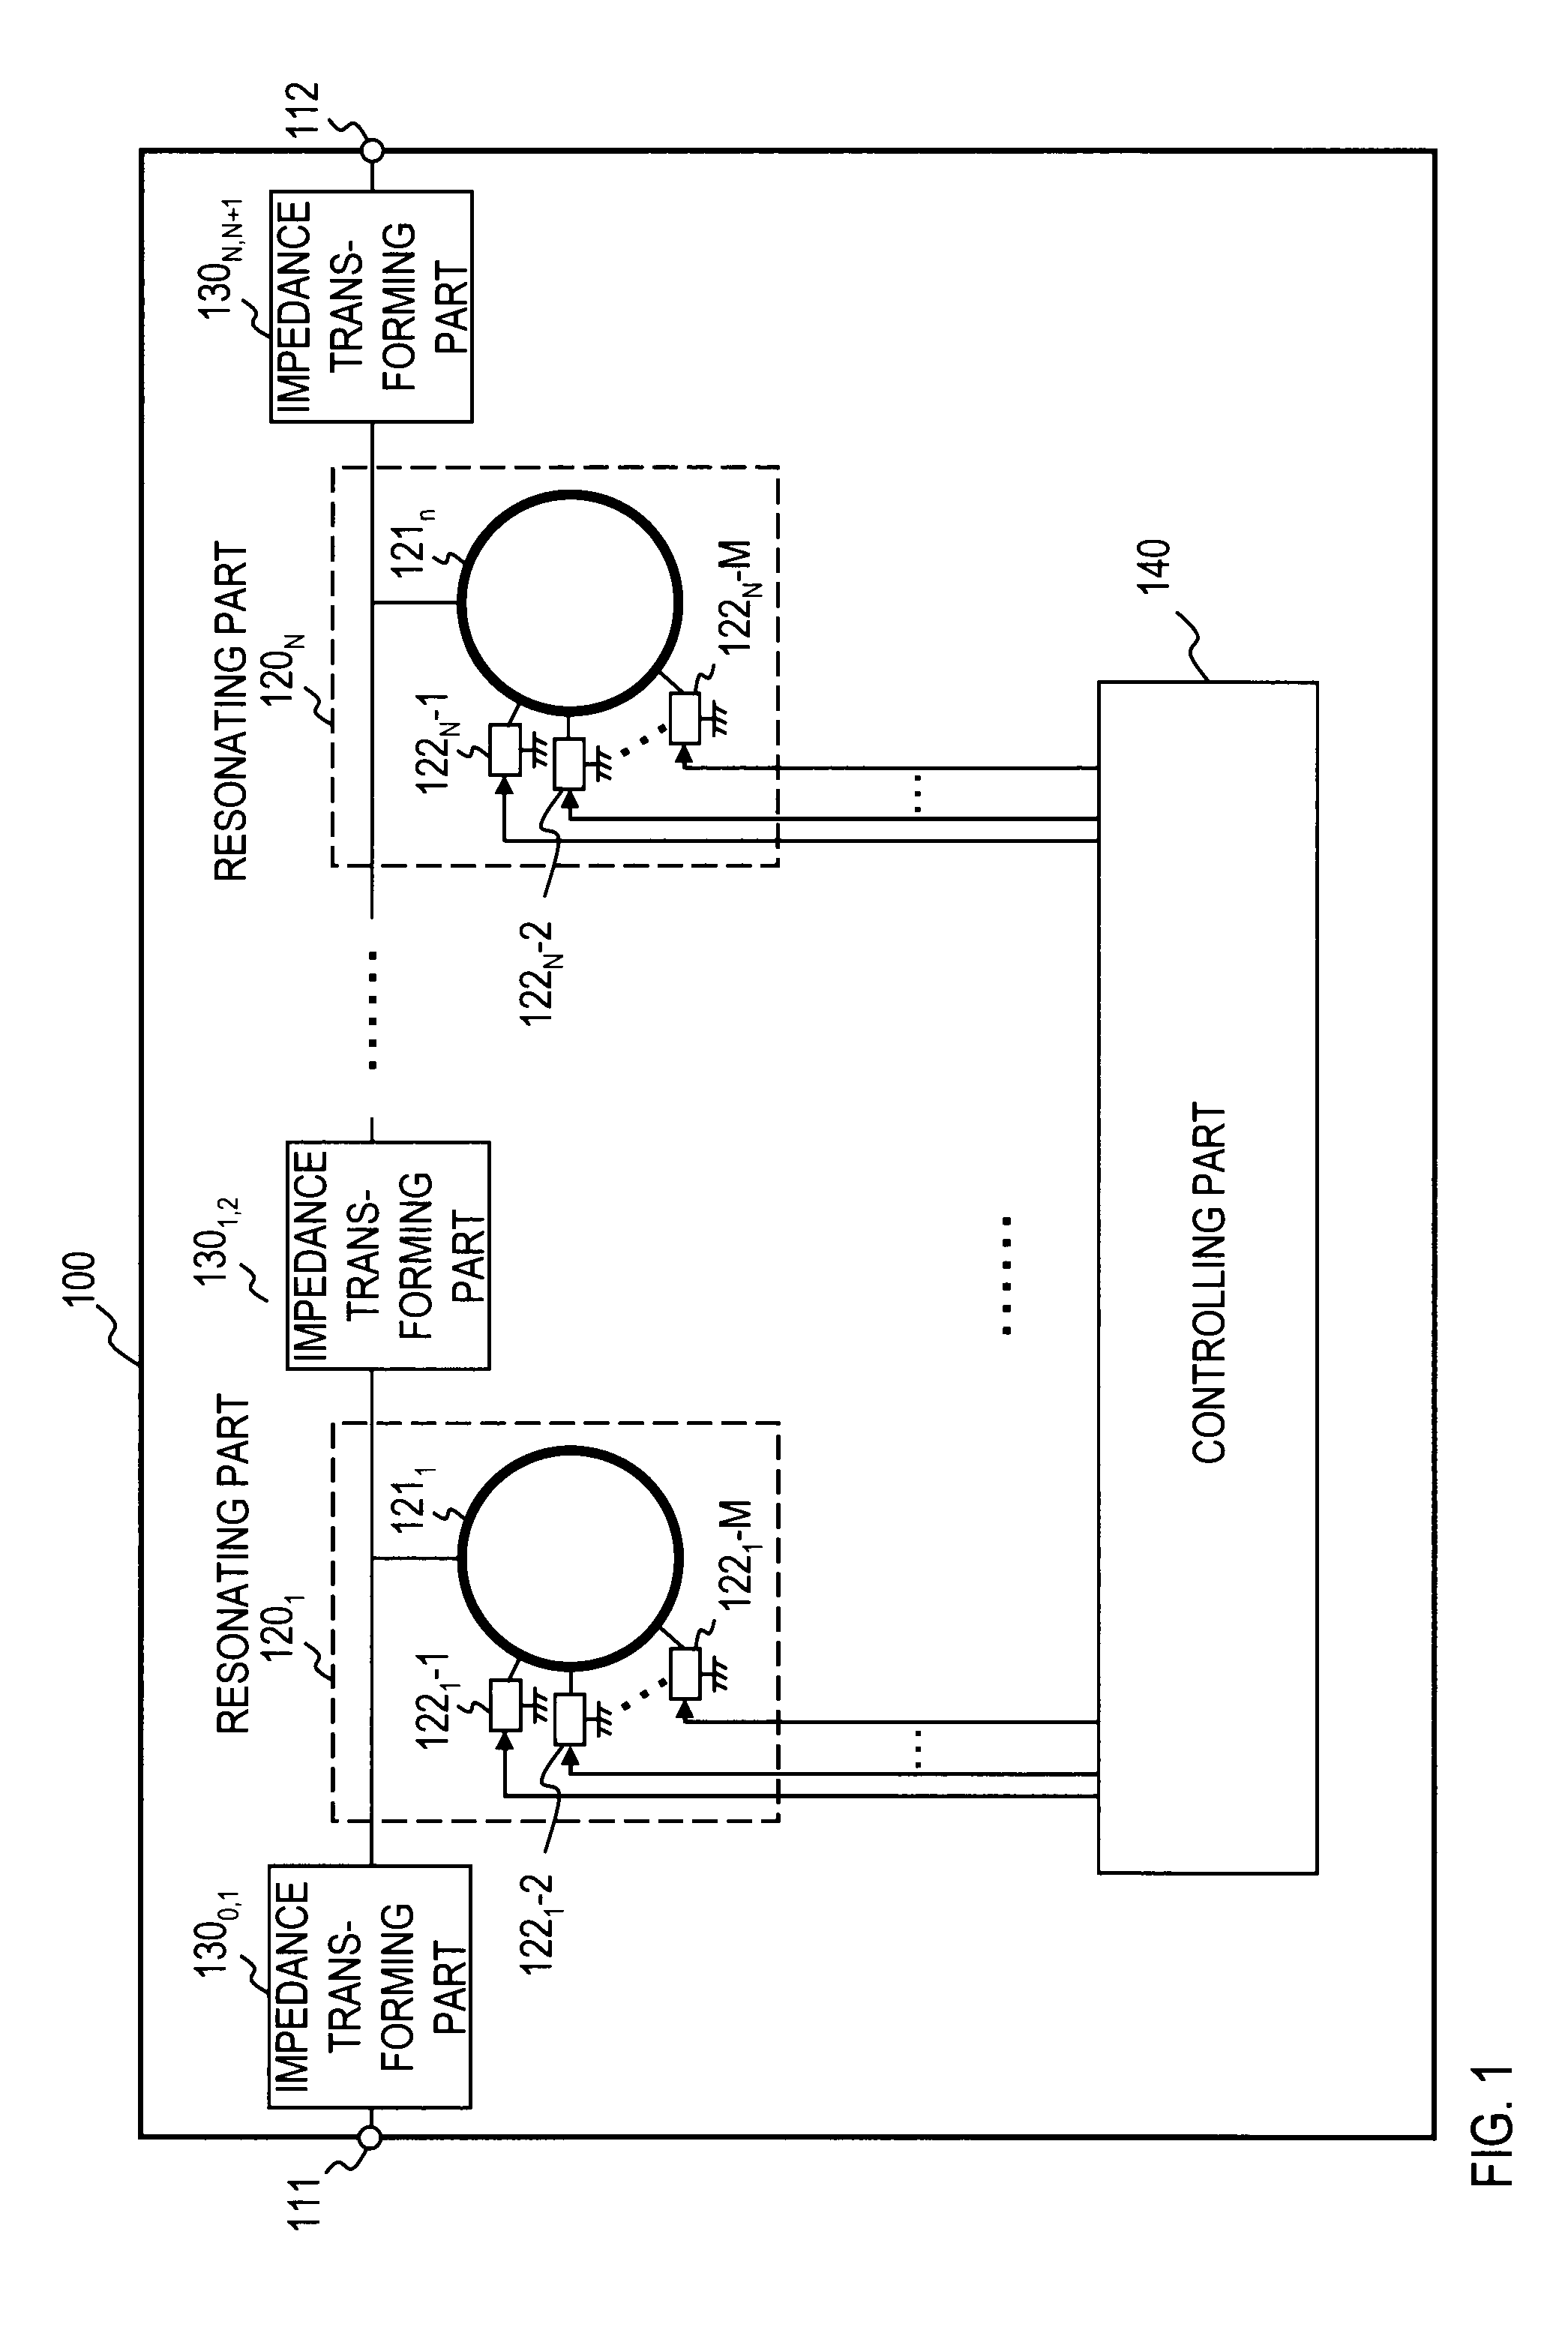 Signal selecting device